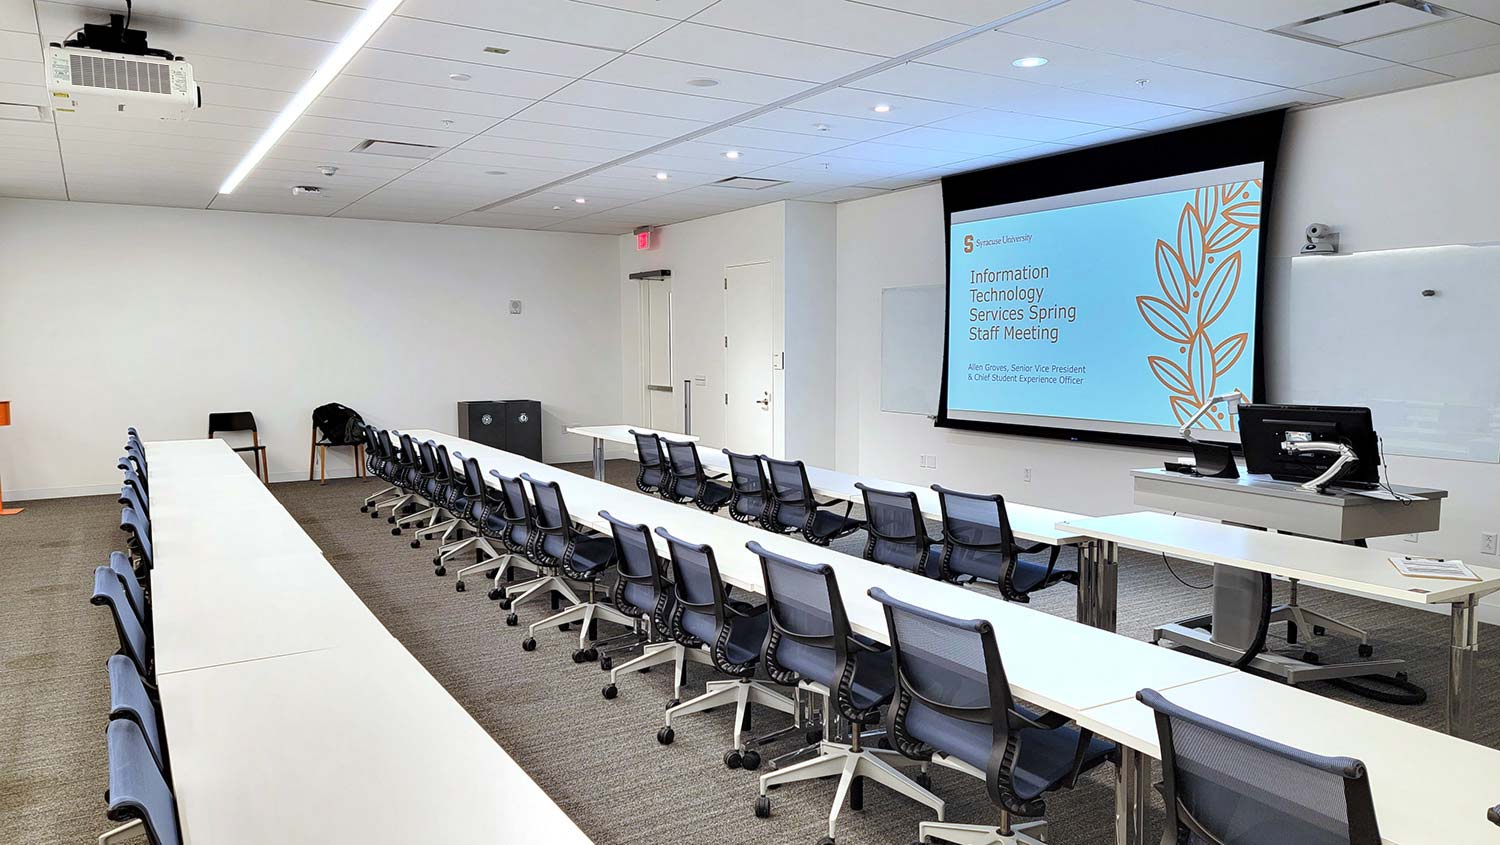 Traditional classrooms include a projection system, with the instructor workstation to one side.